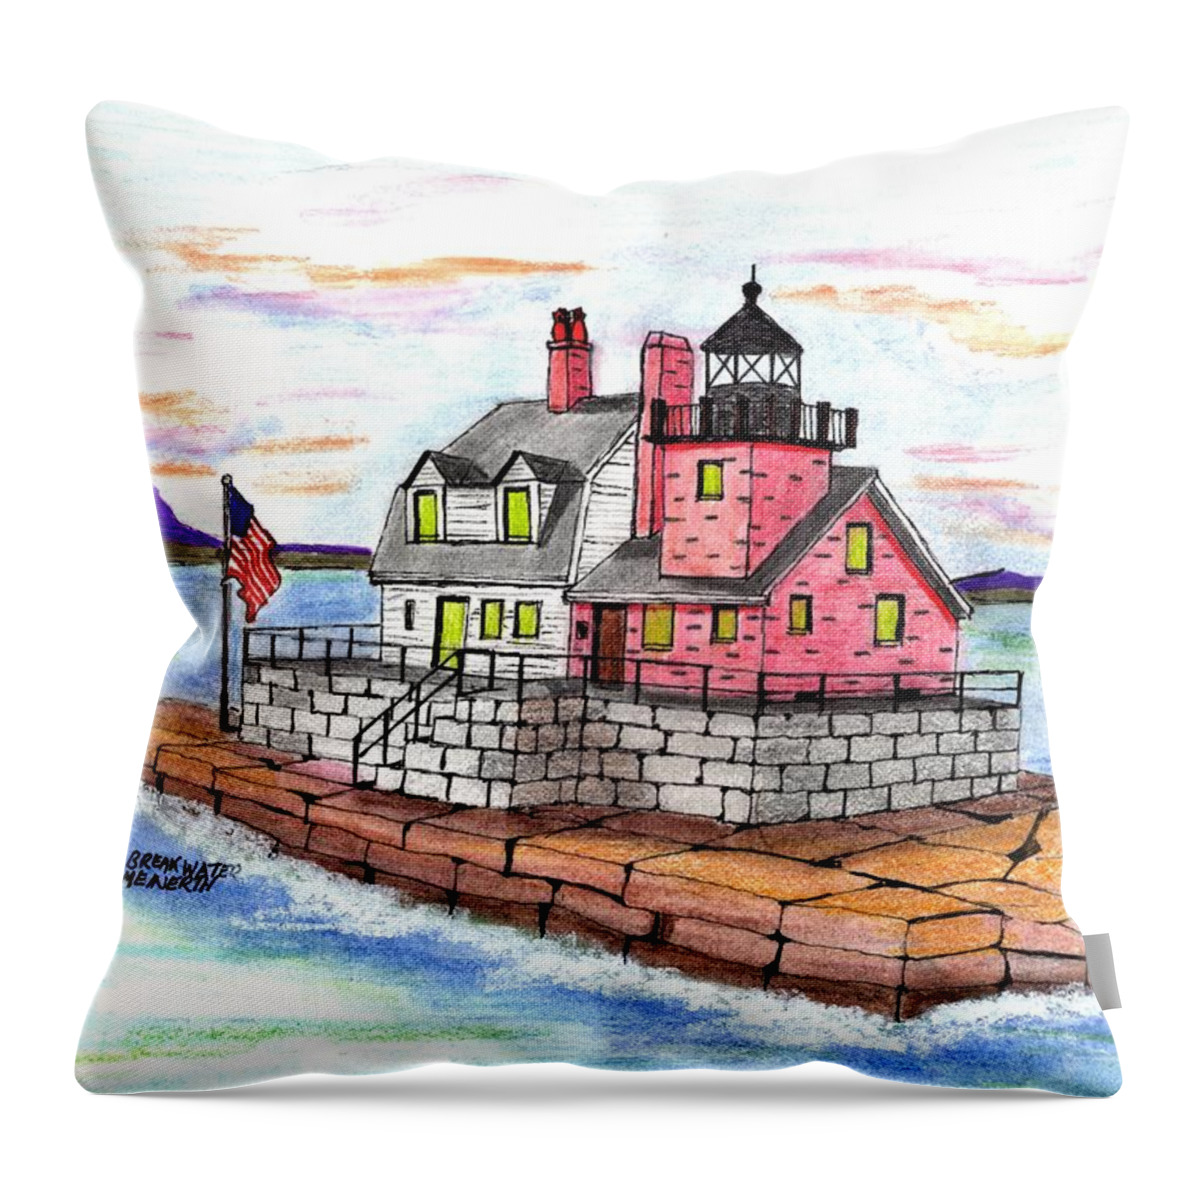 New England Lighthouses Throw Pillow featuring the drawing Rockland Breakwater Light by Paul Meinerth